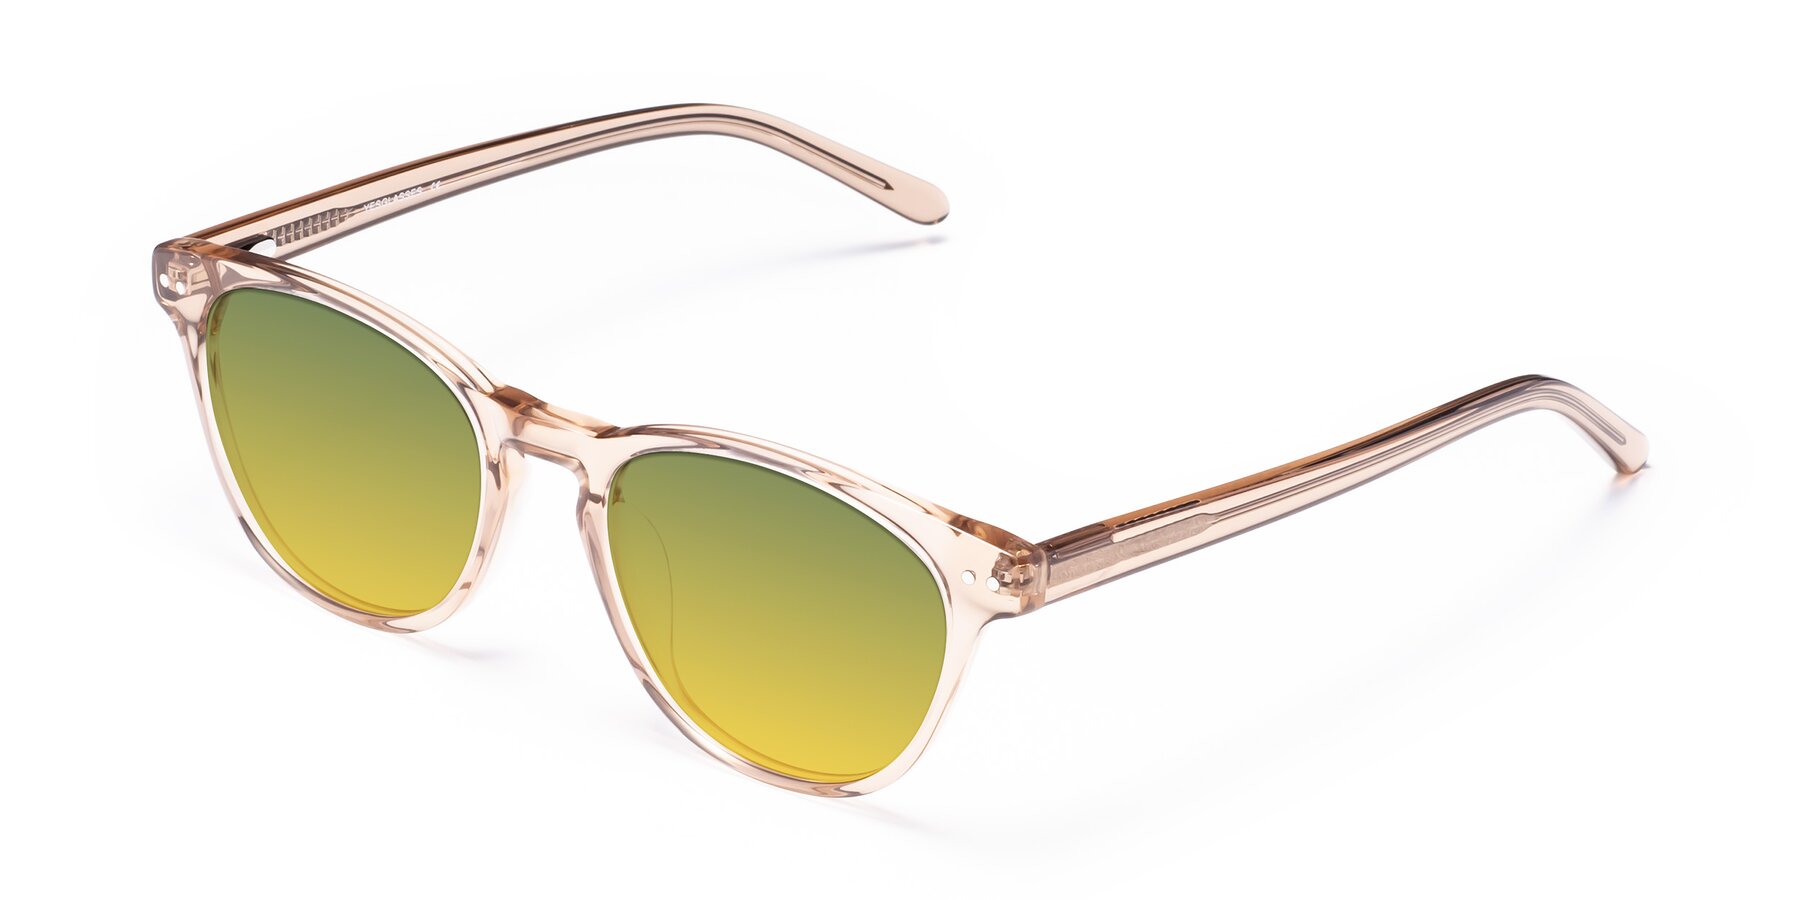 Angle of Blaze in light Brown with Green / Yellow Gradient Lenses